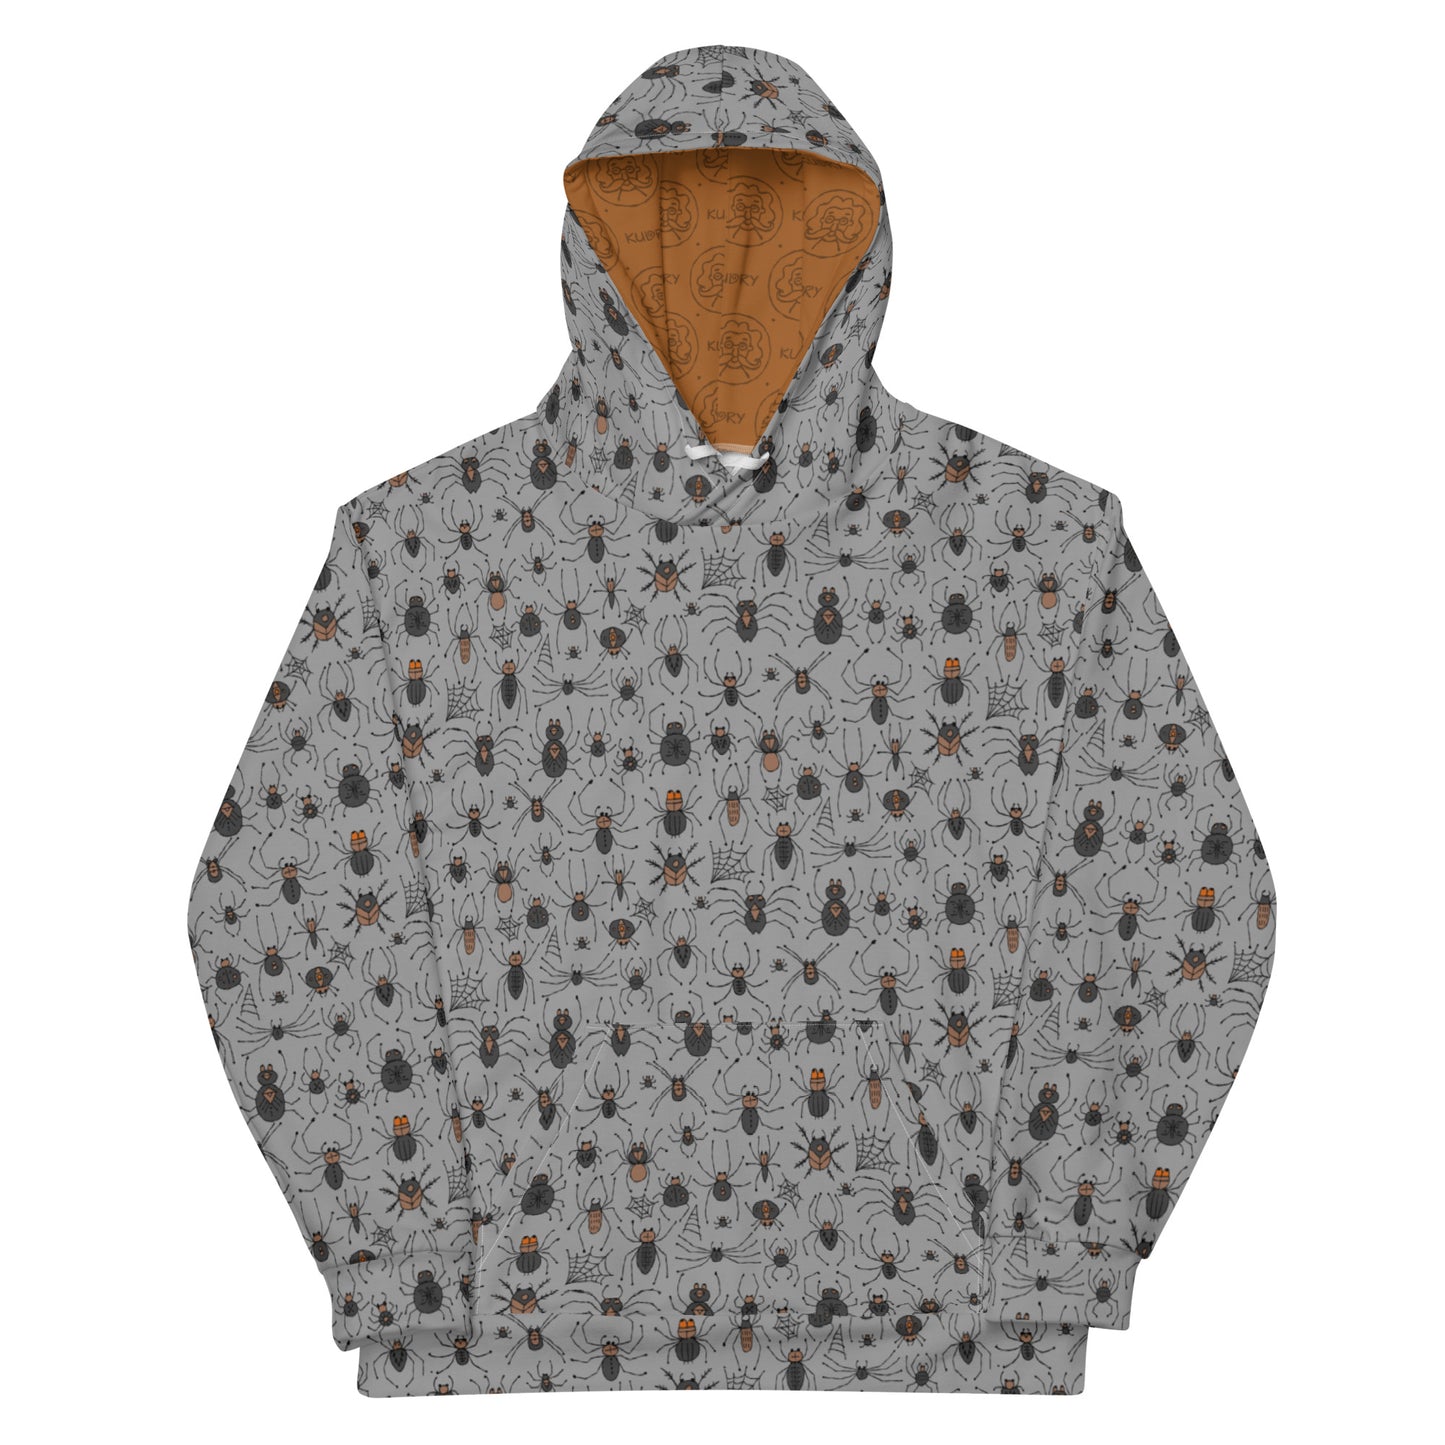 Unisex Hoodie for Arachnology lovers. Black and funny spiders collection on dark grey